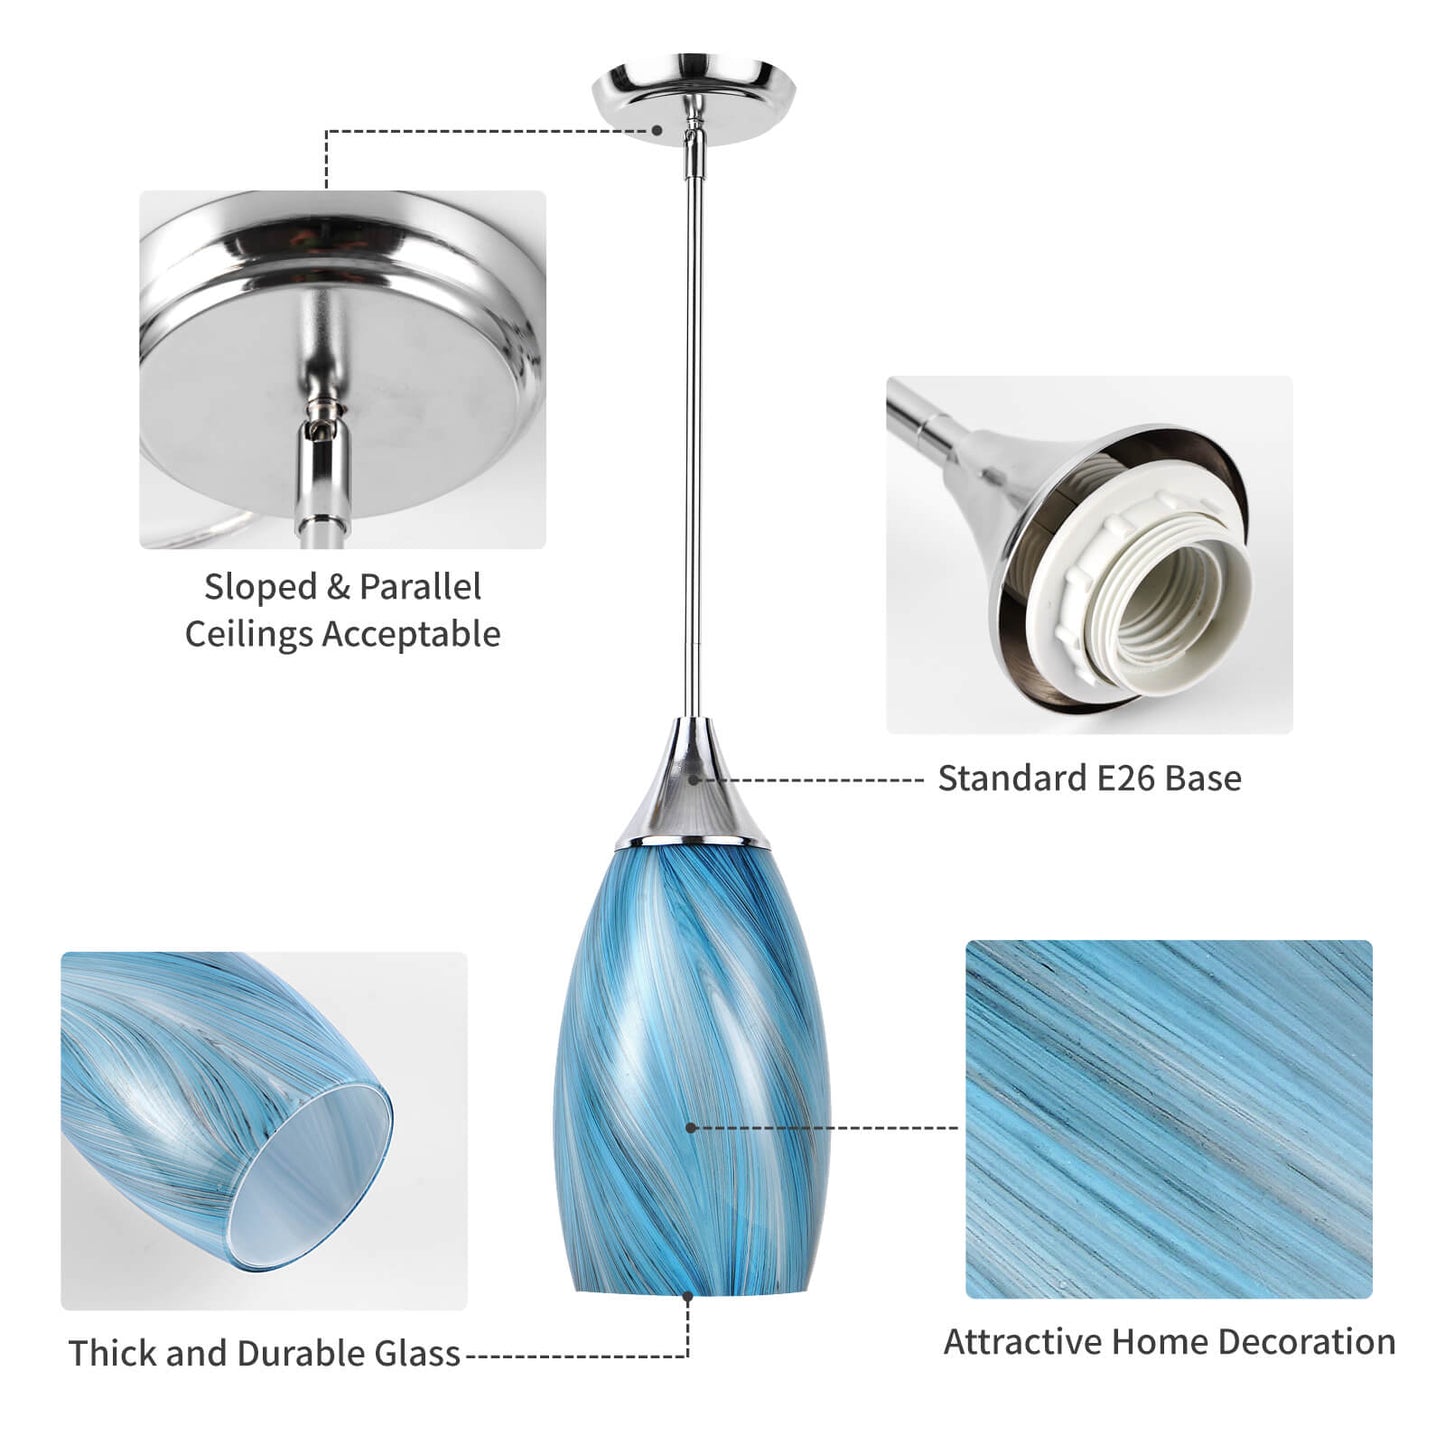 Porseme Pendant Light Features Kitchen Island Hanging Lamp with Plug-in Adjustable Rod Handcraft Art Glass Shade E26 Socket for Home Kitchen Sink Counter Make-up Table (Light Blue)